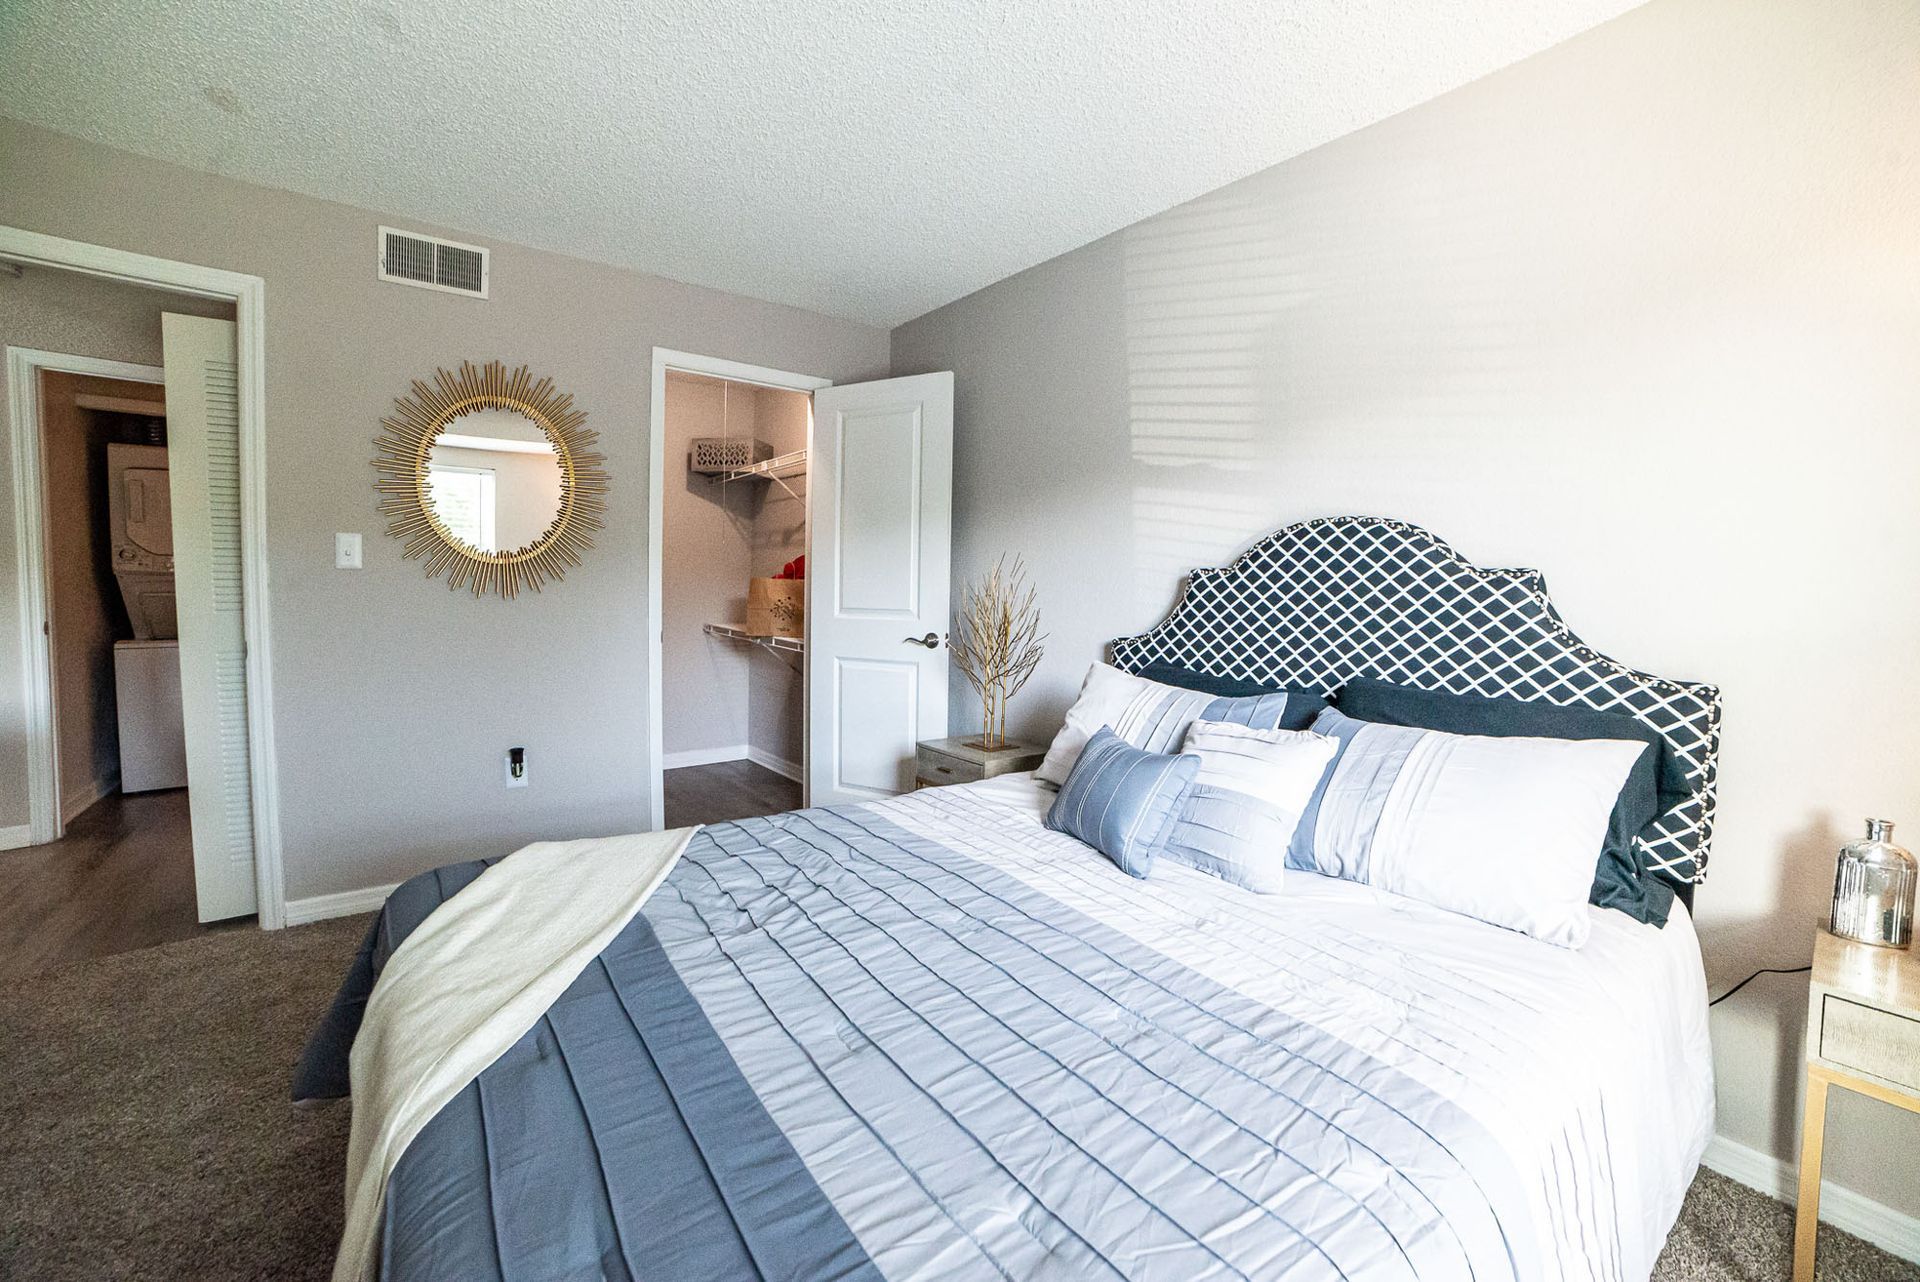 A bedroom with a large bed and a mirror on the wall at Trellis at The Lakes.